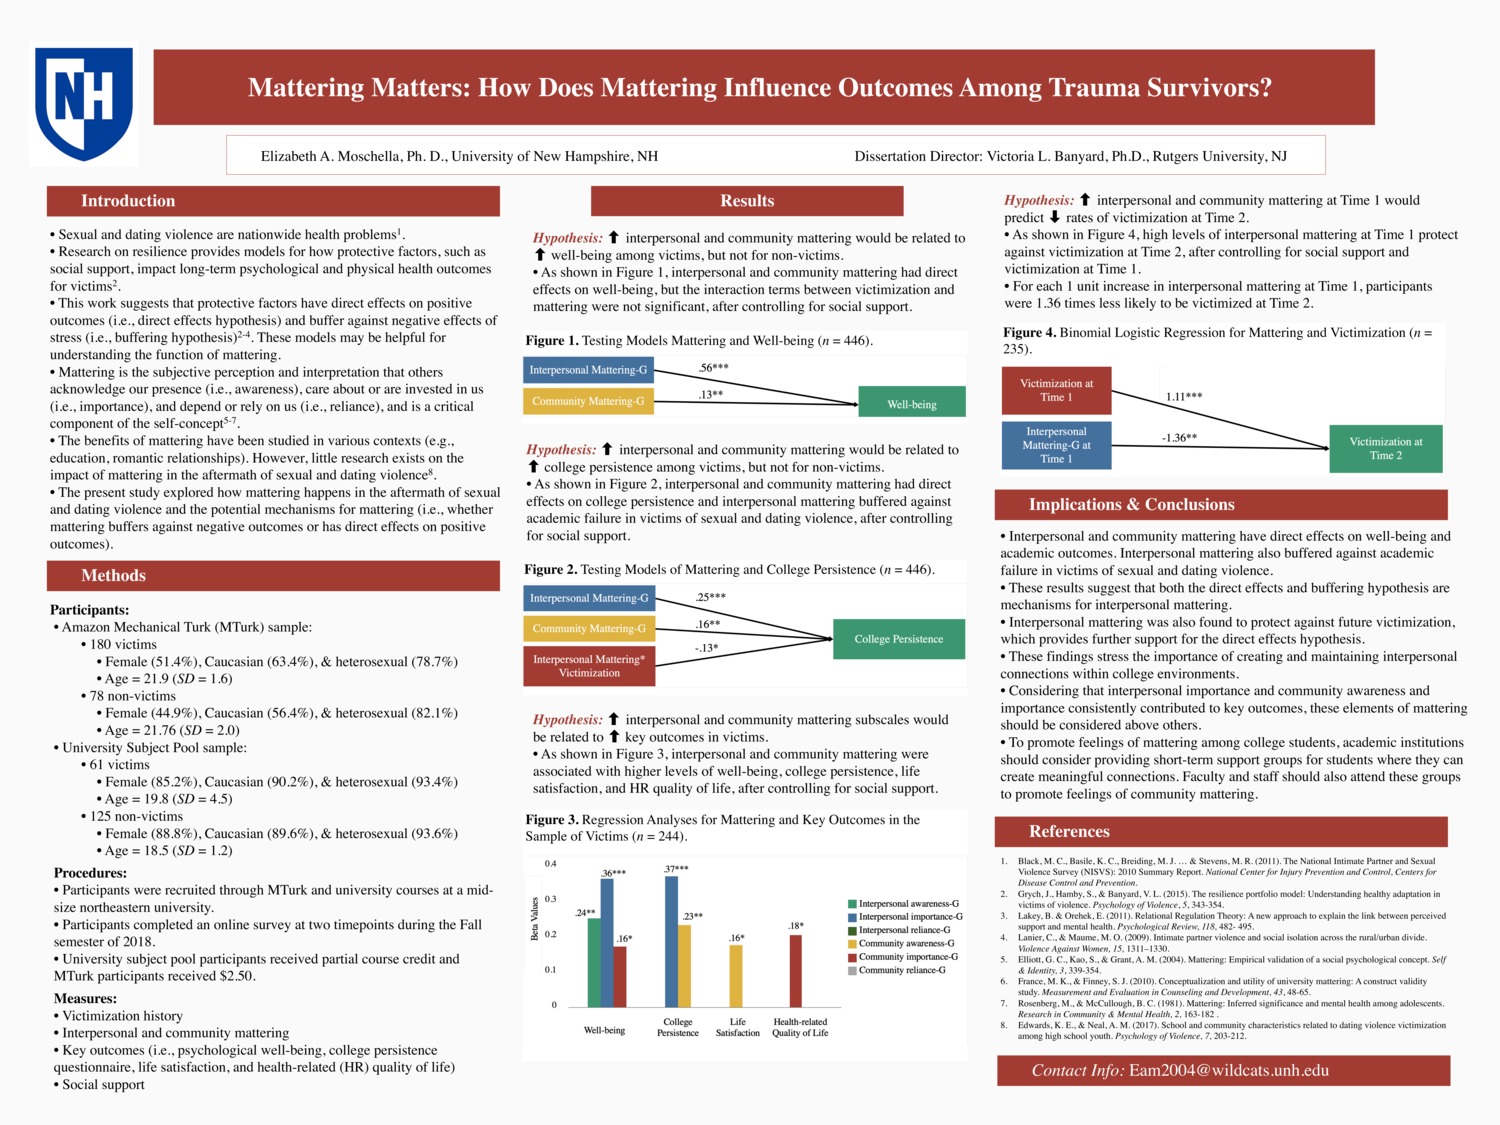 Mattering Matters: How Does Mattering Influence Outcomes Among Trauma Survivors? by eam2004